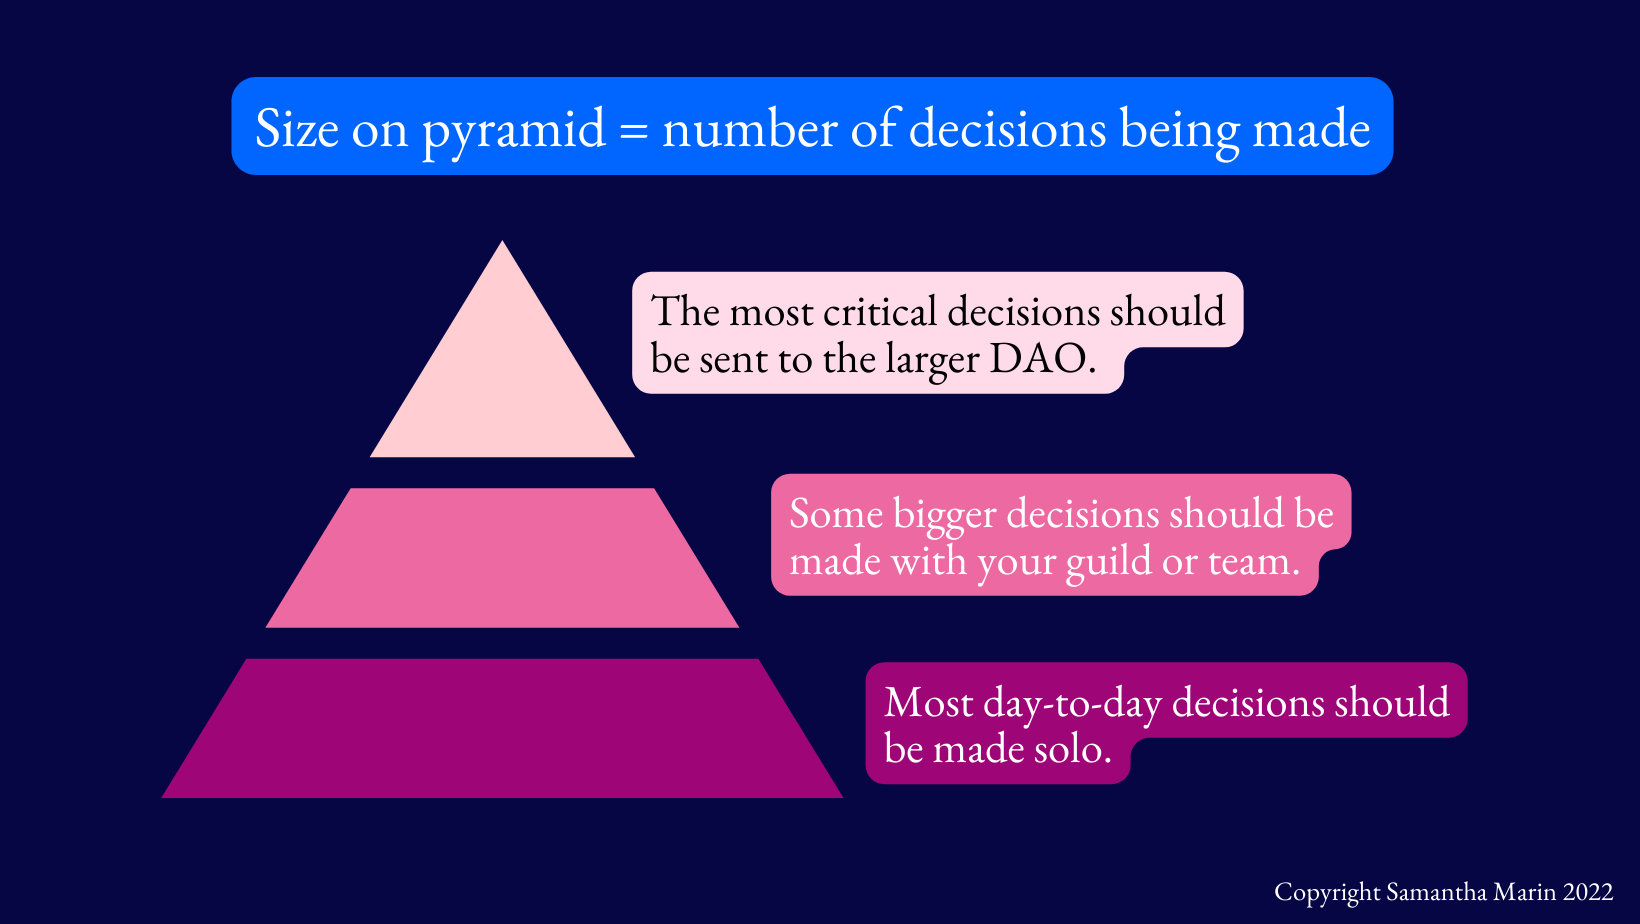 Often, these lines get blurred. How do you know where in the pyramid a decision should be made? It gets tricky.